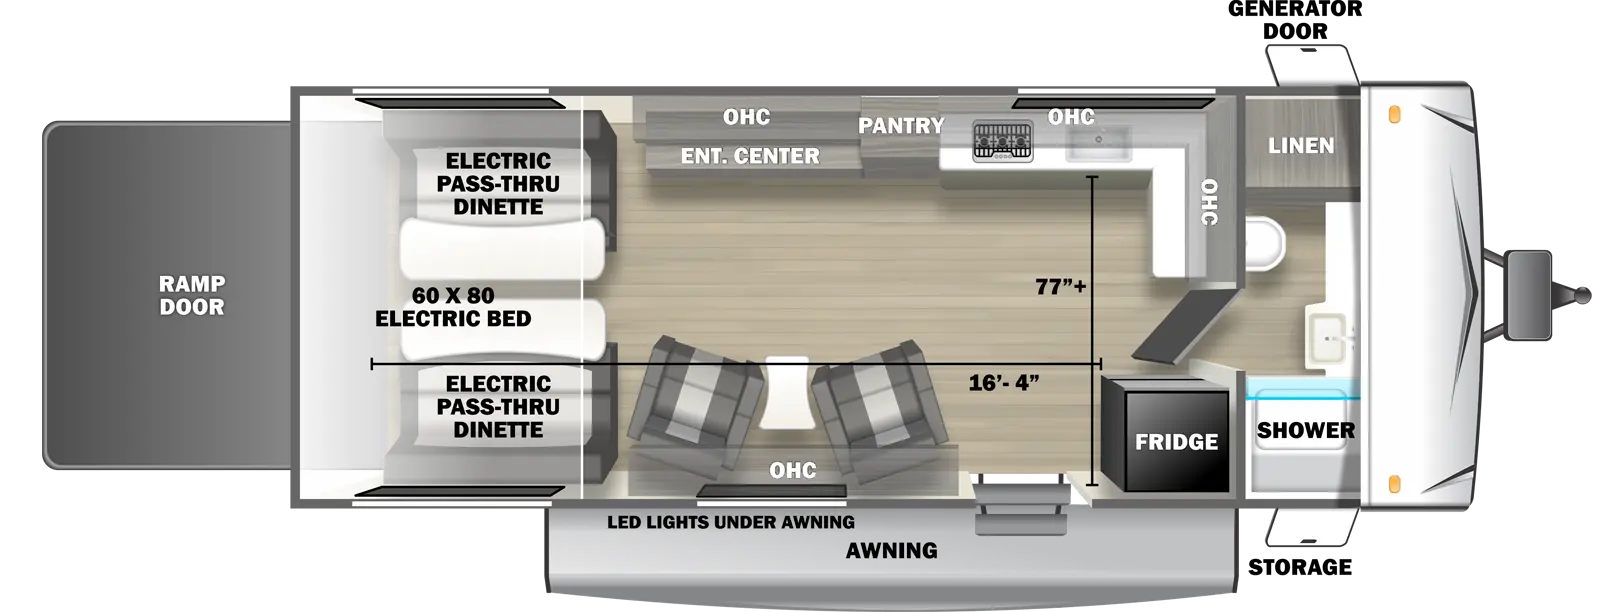 The 2450RLX travel trailer has no slide outs, 1 entry door and 1 rear ramp door. Exterior features include an awning with LED lights, front door side storage and front off-door side generator door. Interior layout from front to back includes: front bathroom with linen storage, toilet, countertop, sink and shower; kitchen with refrigerator next to entry door, L-shaped off-door side countertop with overhead cabinets, stovetop, and kitchen sink; off-door side pantry; 2 door side recliners with end table; off-door side entertainment center across from the recliners; and rear electric 60 x 80 bed with opposing side electric pass-through dinette. Cargo length from rear of unit to refrigerator is 16 ft. 4 in. Cargo width from kitchen countertop to door side wall is 77 inches.